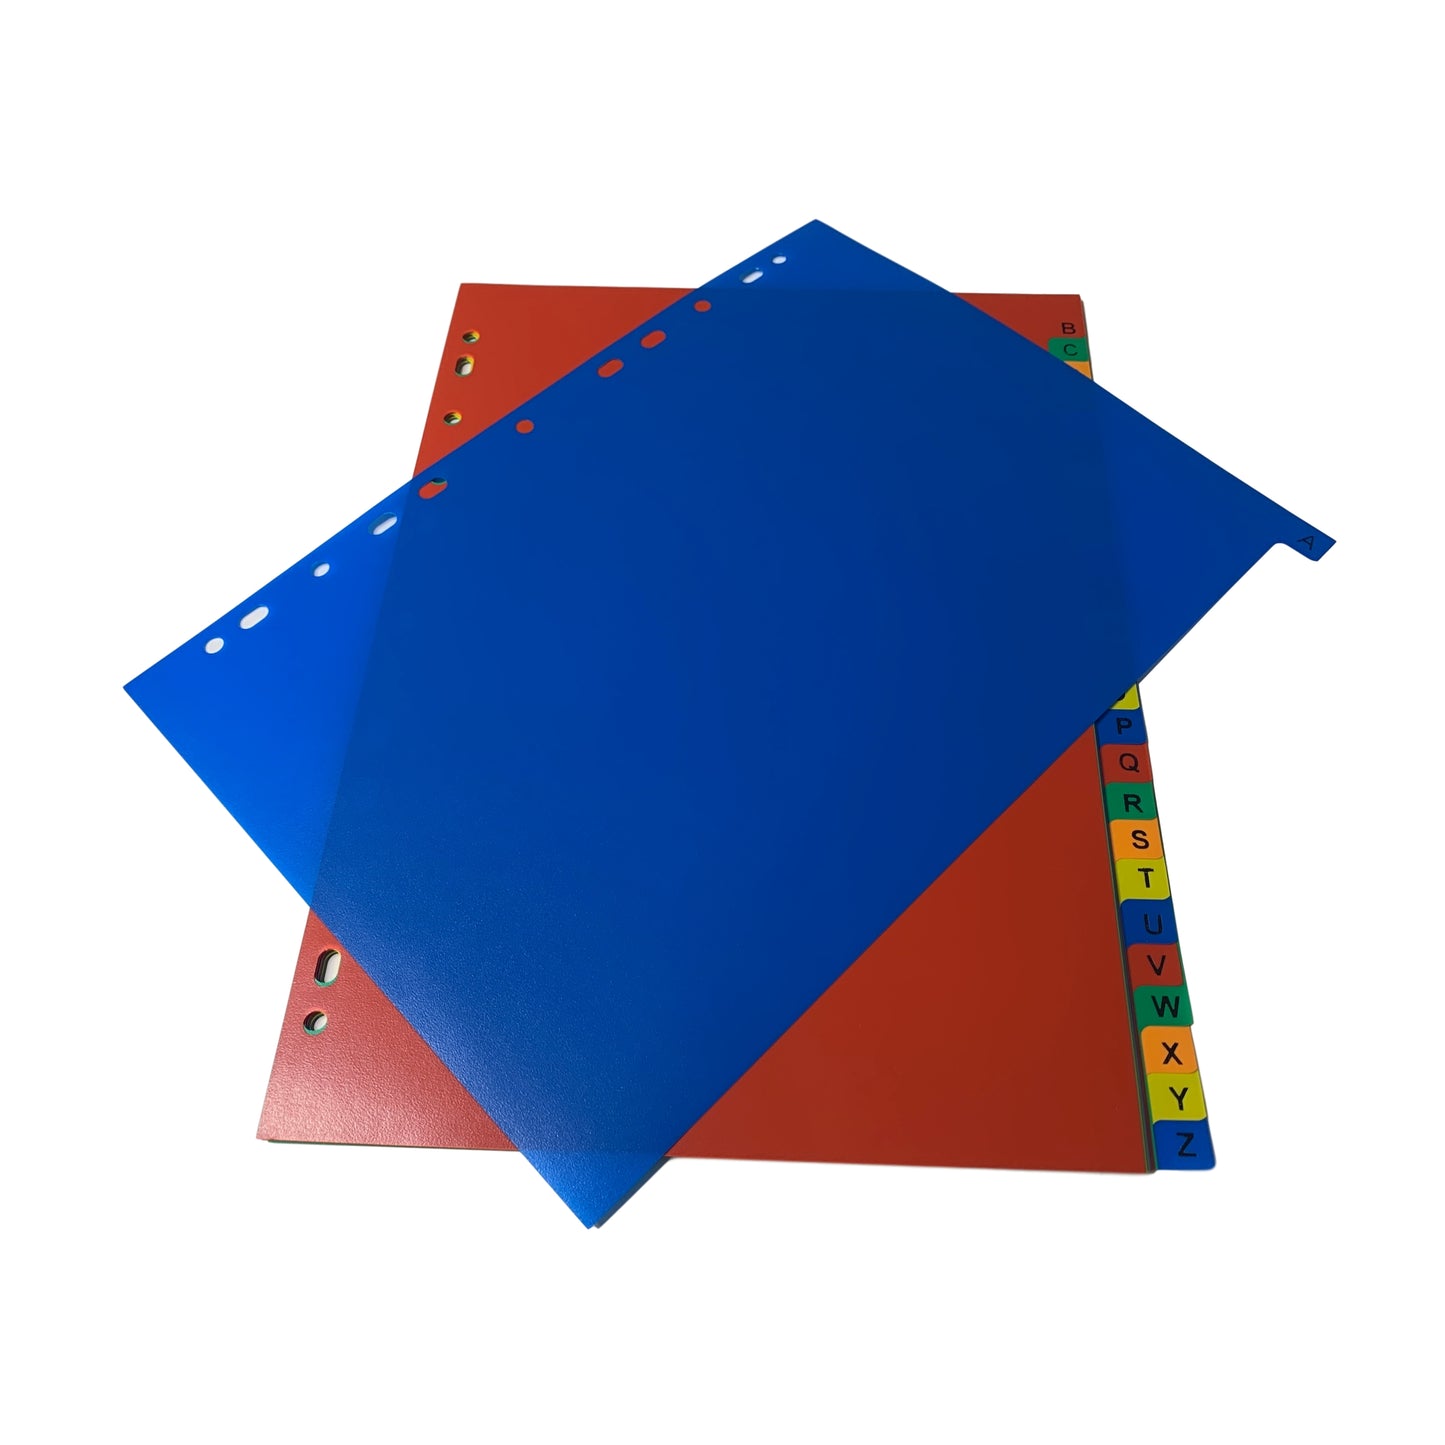 A4 A-Z 26 Part Polypropylene Dividers with Reinforced Index Cover